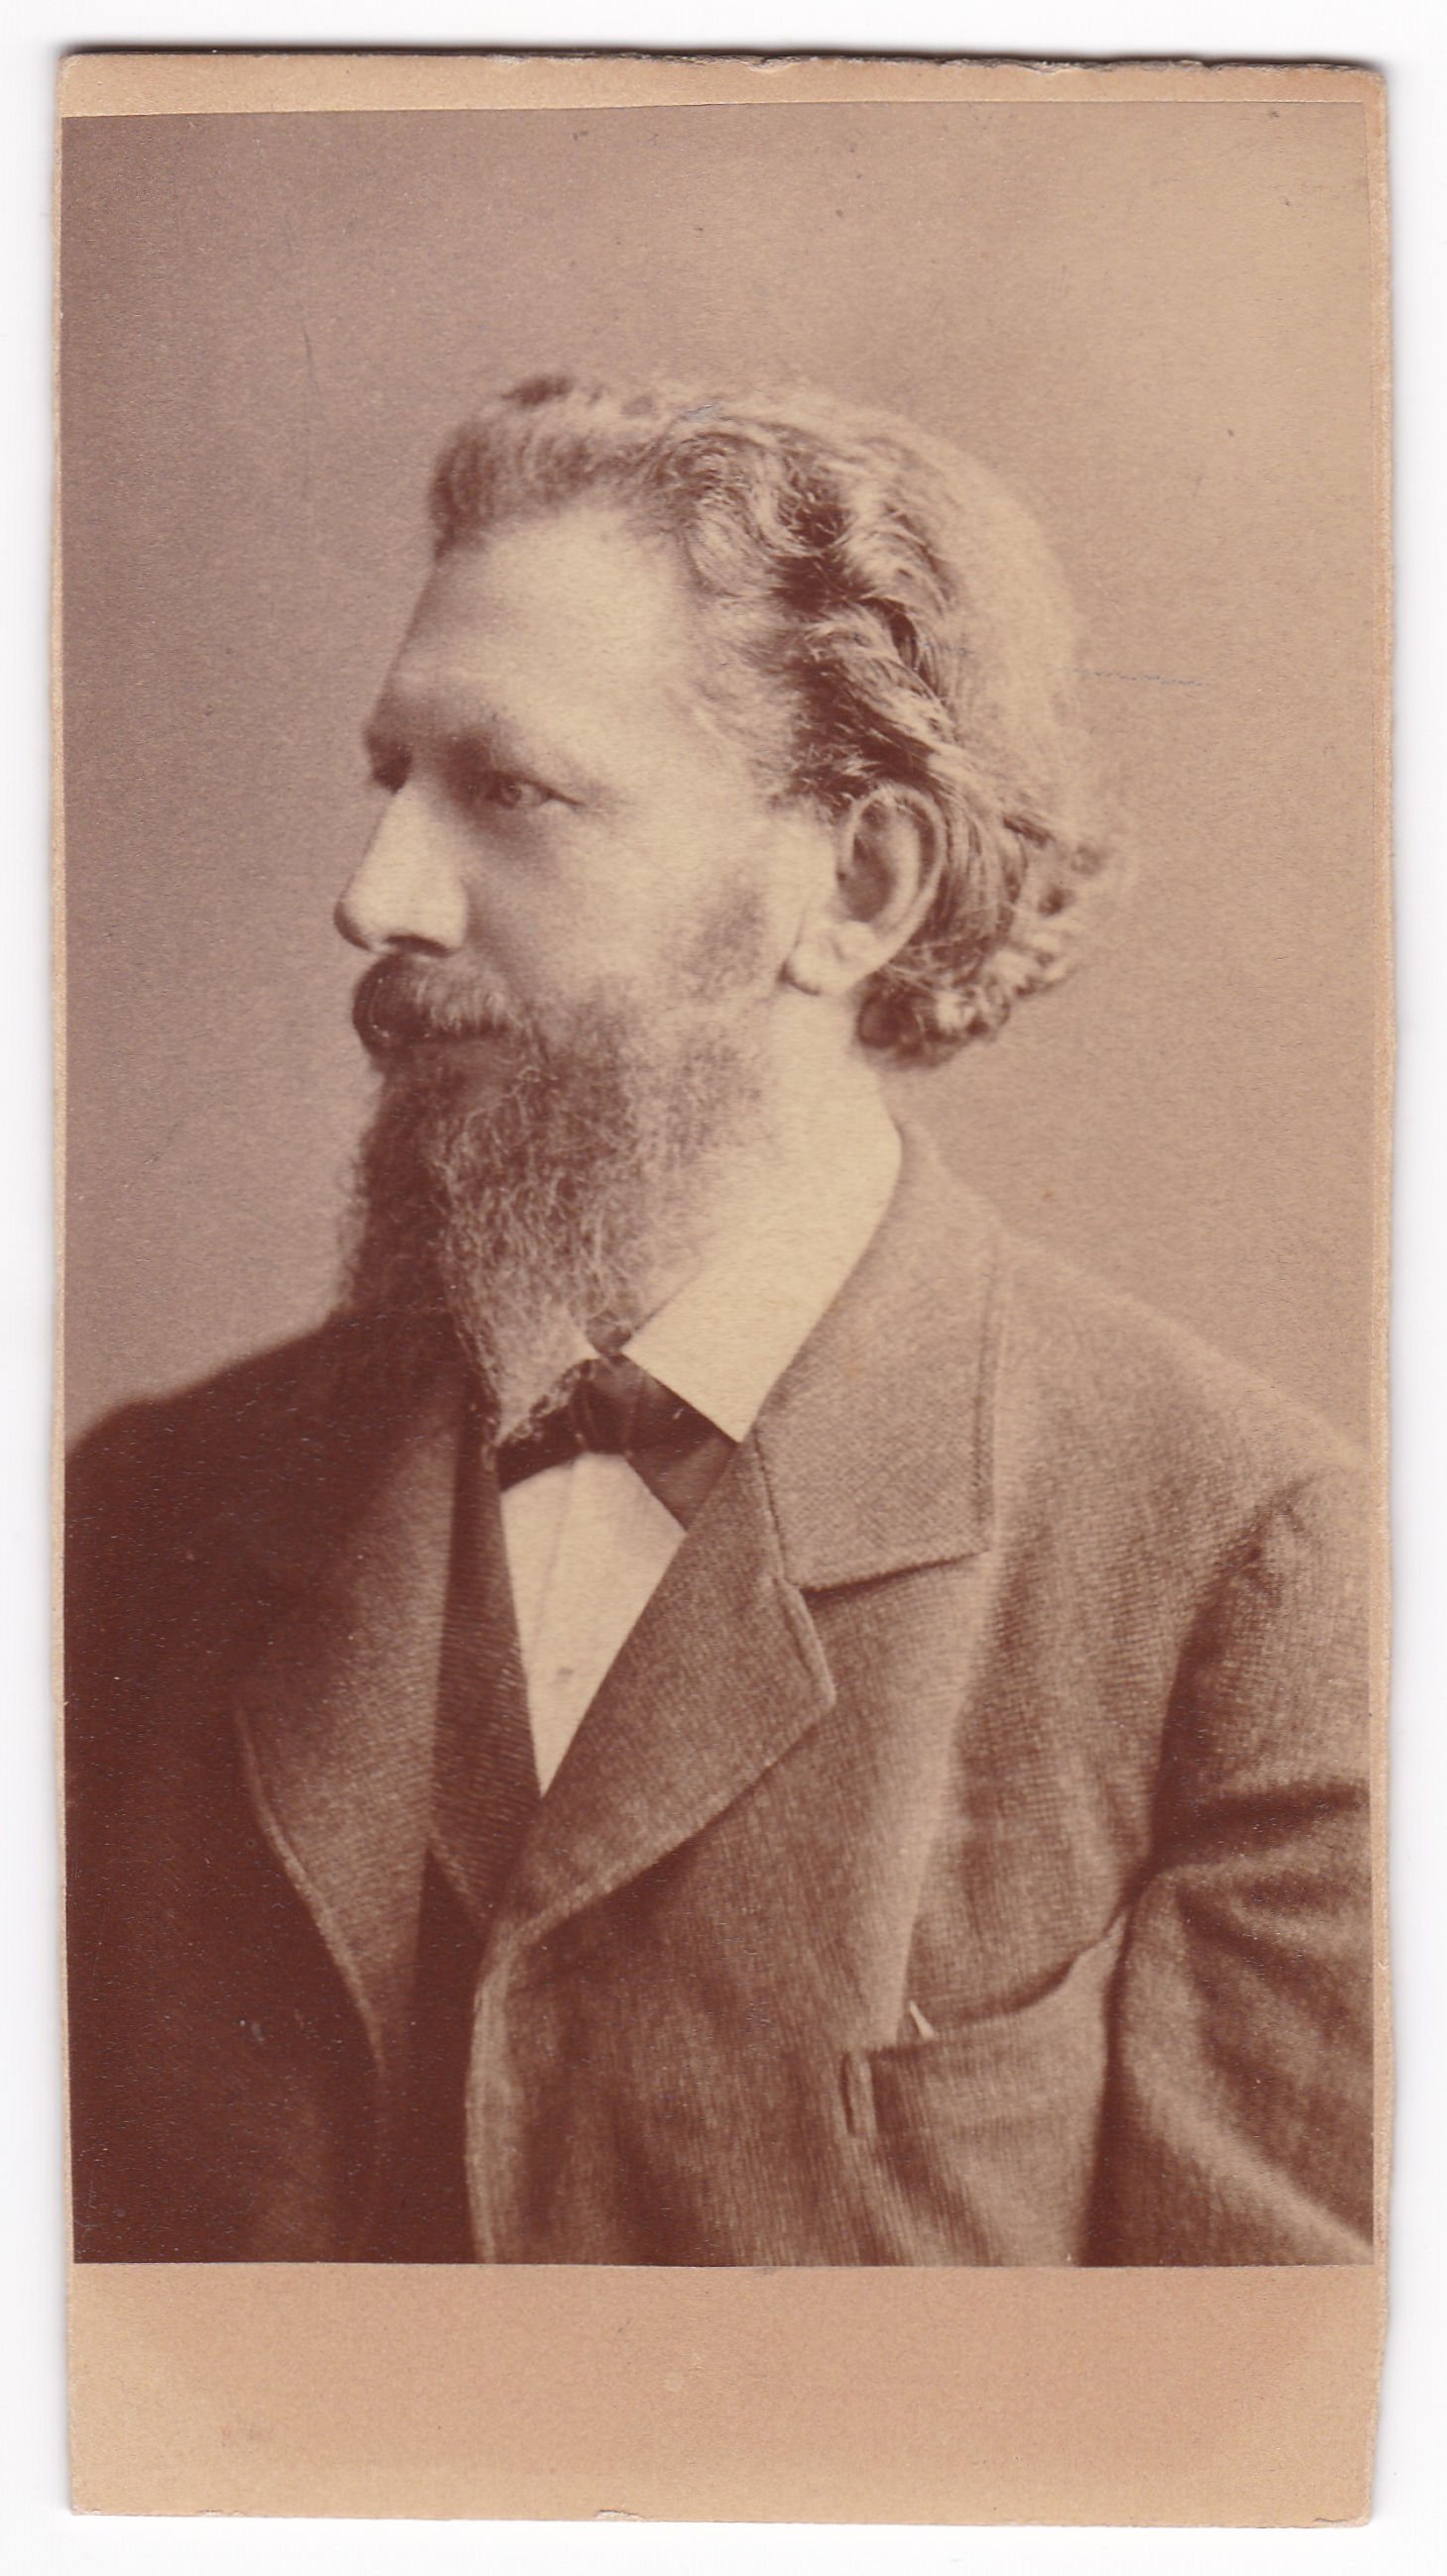 August Kundt (1872-1888), 88455 p (DRM CC BY-NC-SA)